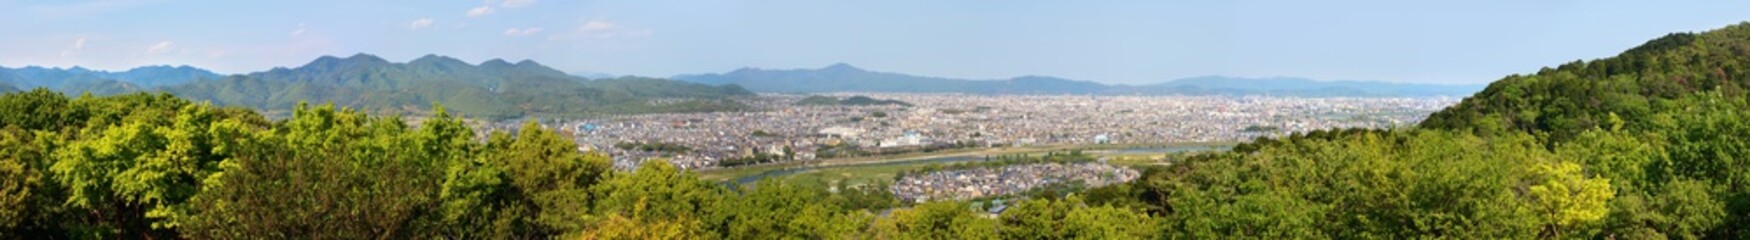 Ultra wide panorama of Arashiyama and Kyoto city in Japan and the surrounding landscape and mountains